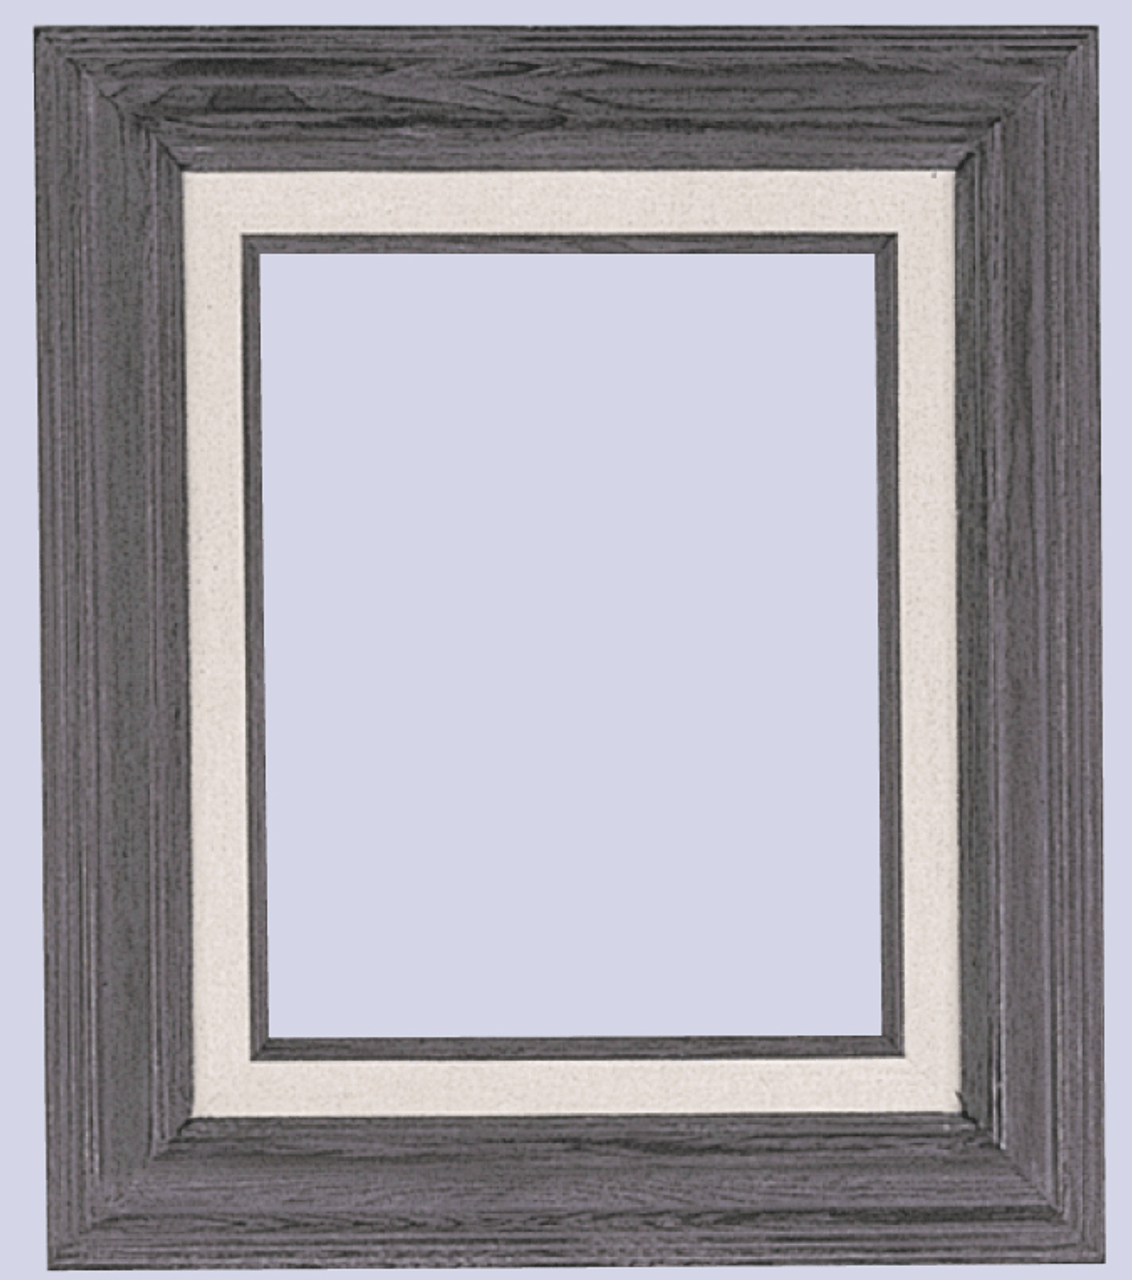  3 Inch Econo Wood Frames With Linen Liners: 48X48*